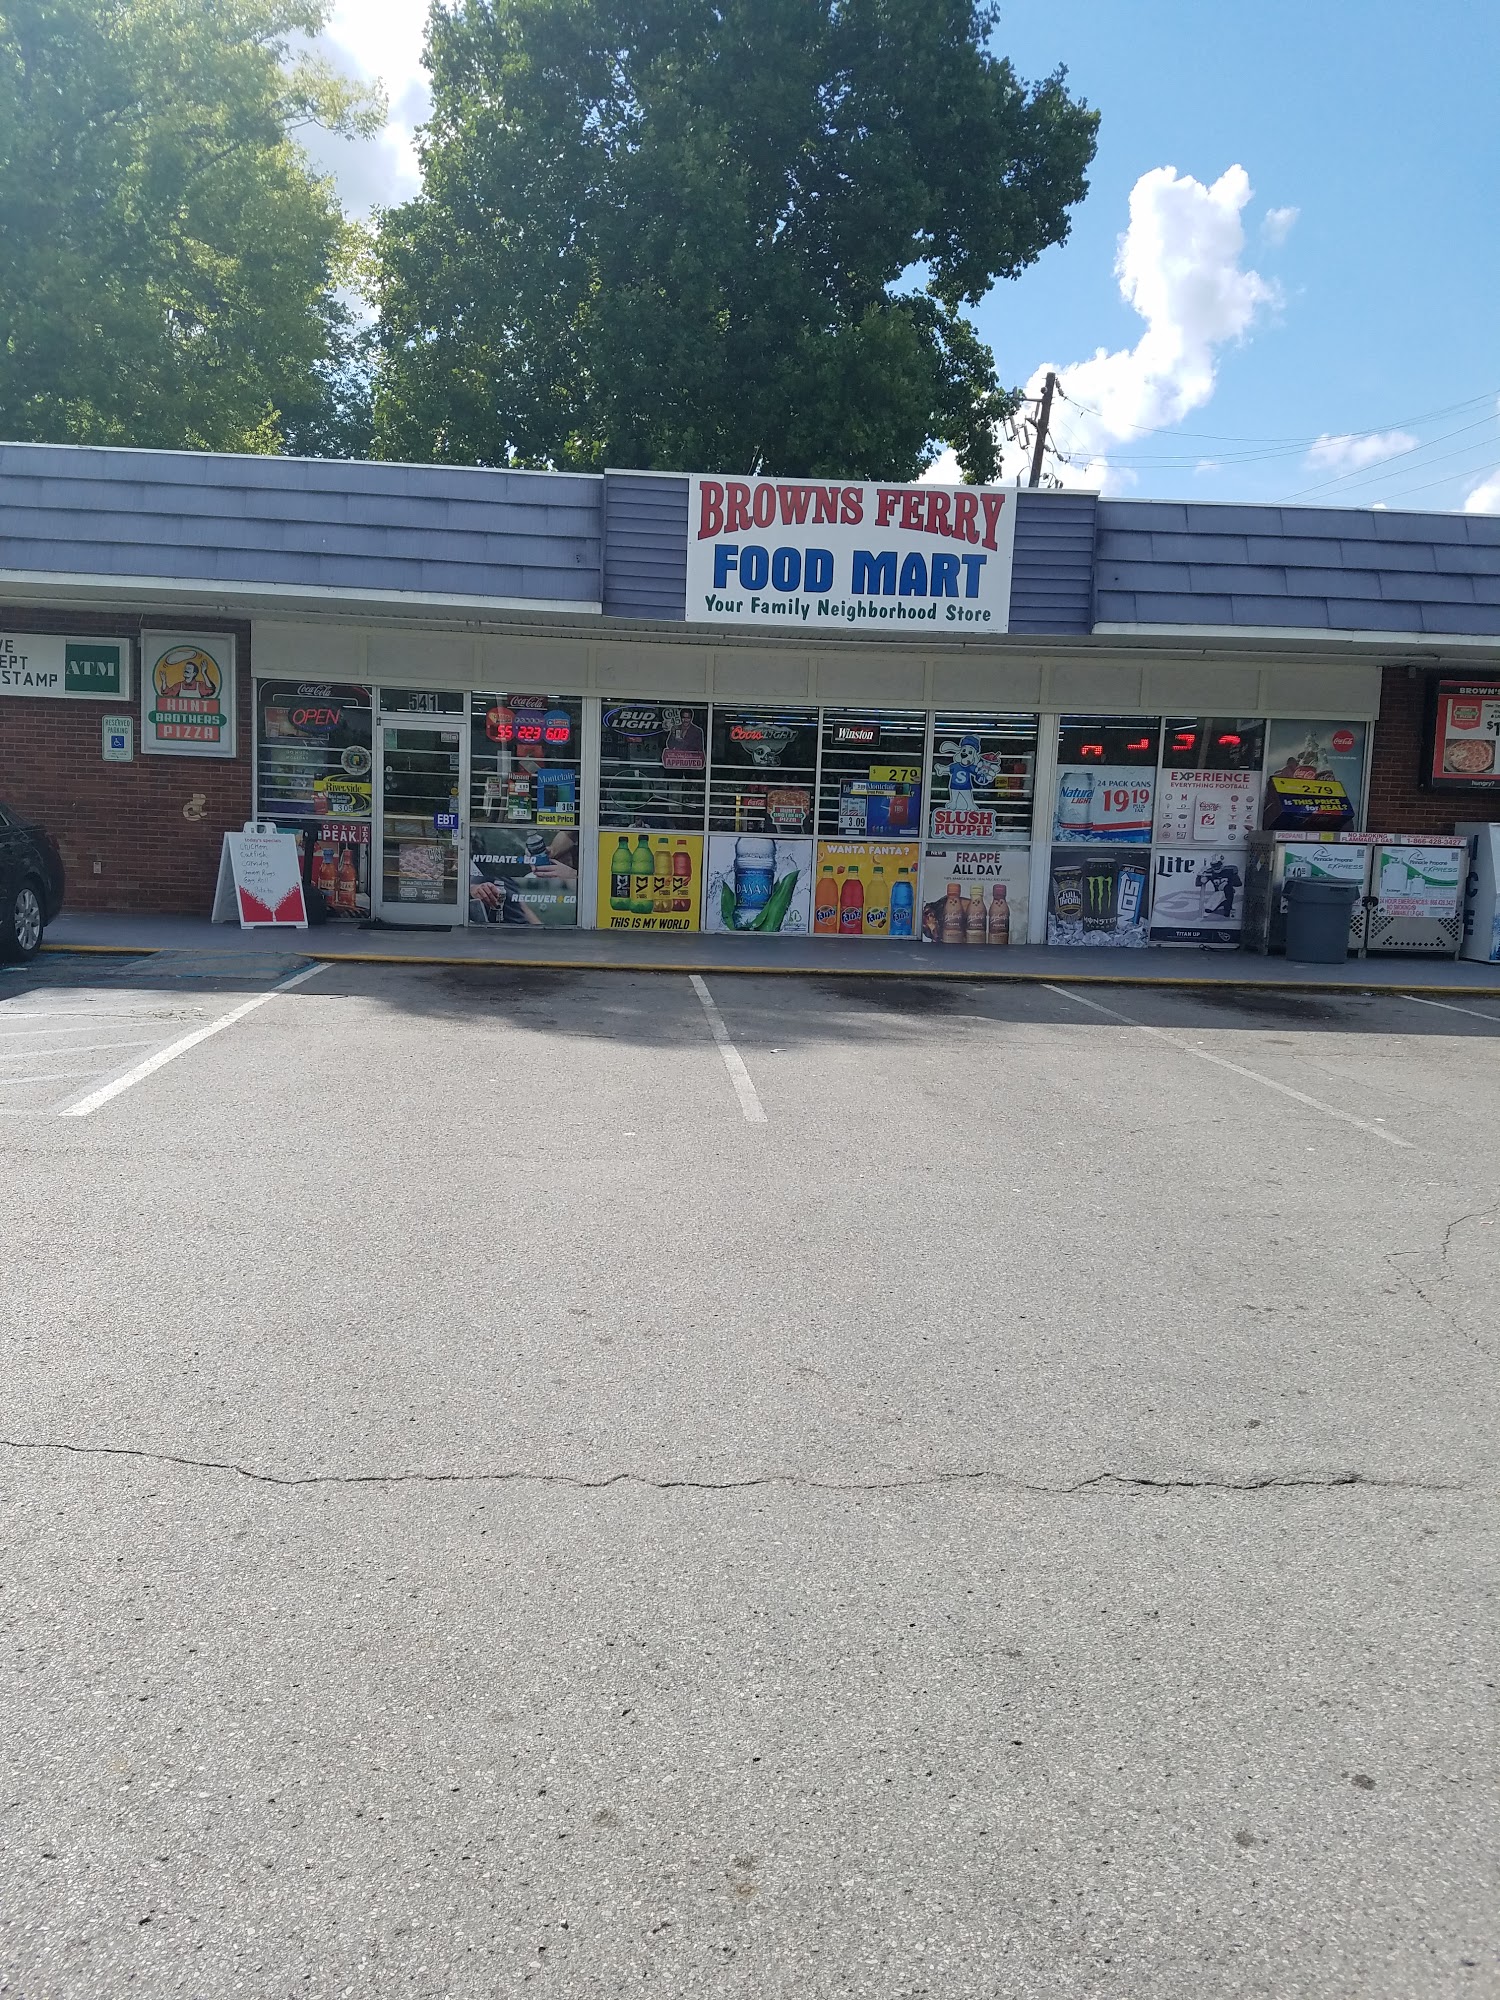 Browns Ferry Food Mart